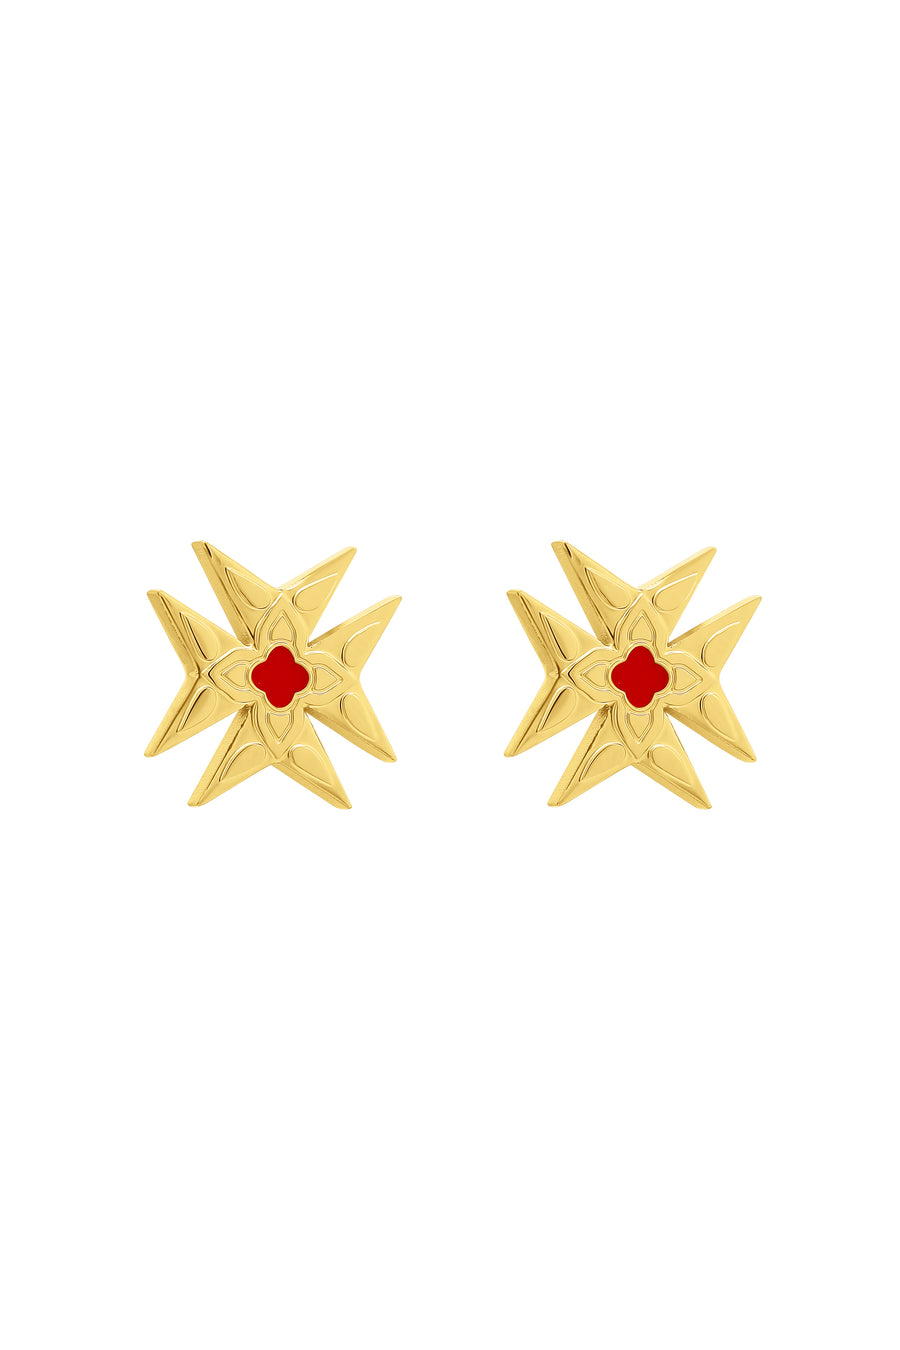 Carisma’s Eight Pointed Cross Stud Earring Set